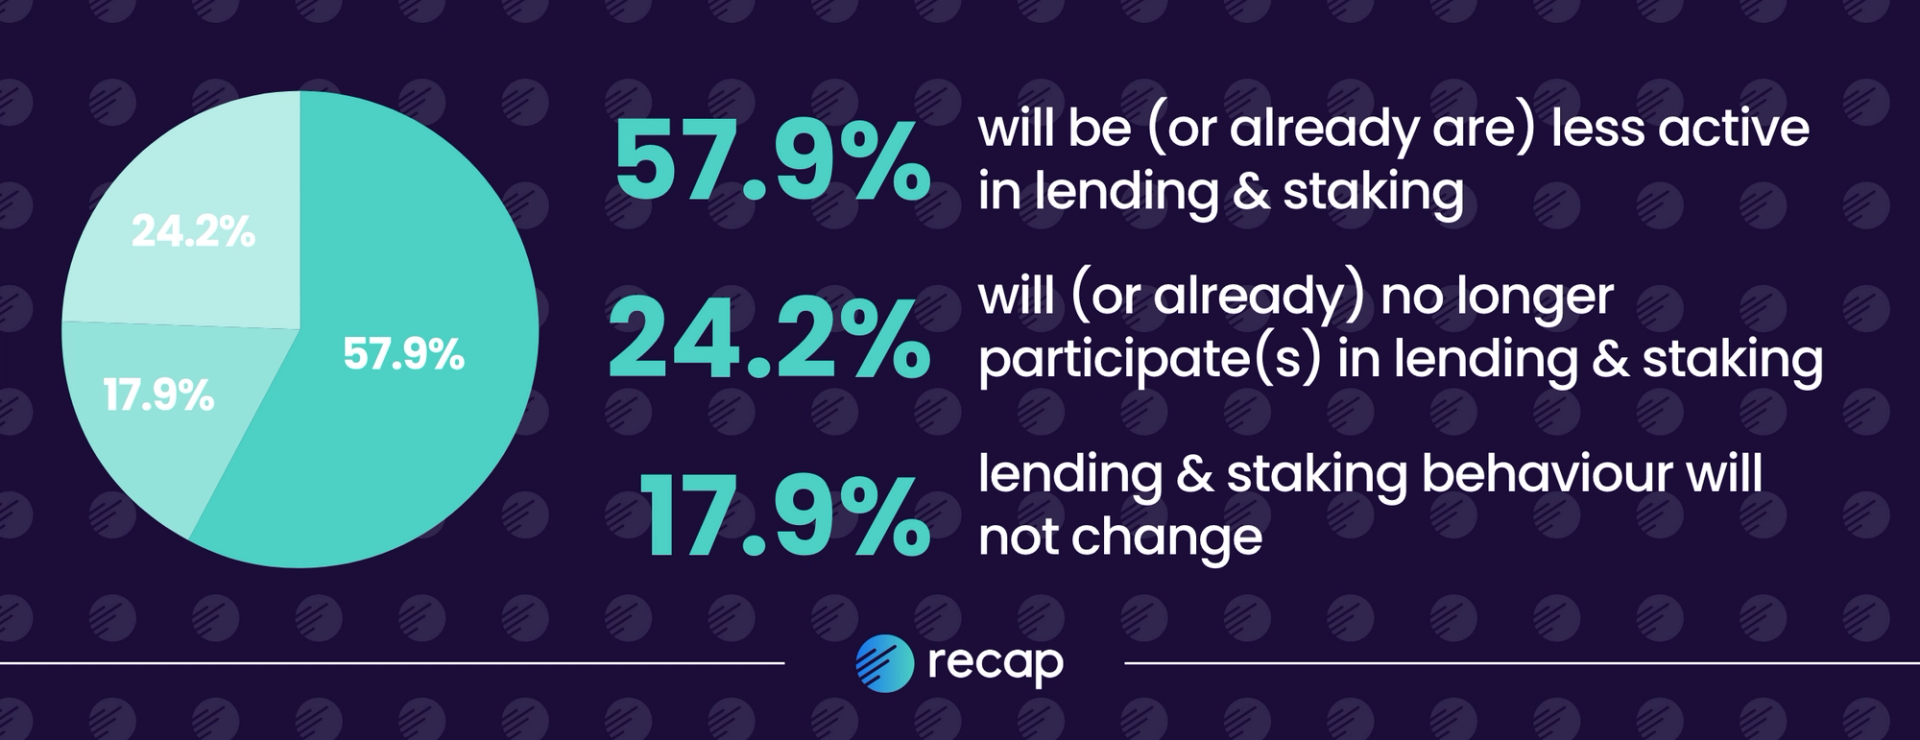 Infographic: 57.9% will be (or already are) less active in lending and staking; 24.2% will (or already) no longer particpate in lending and staking; 17.9% lending and staking behaviour will not change